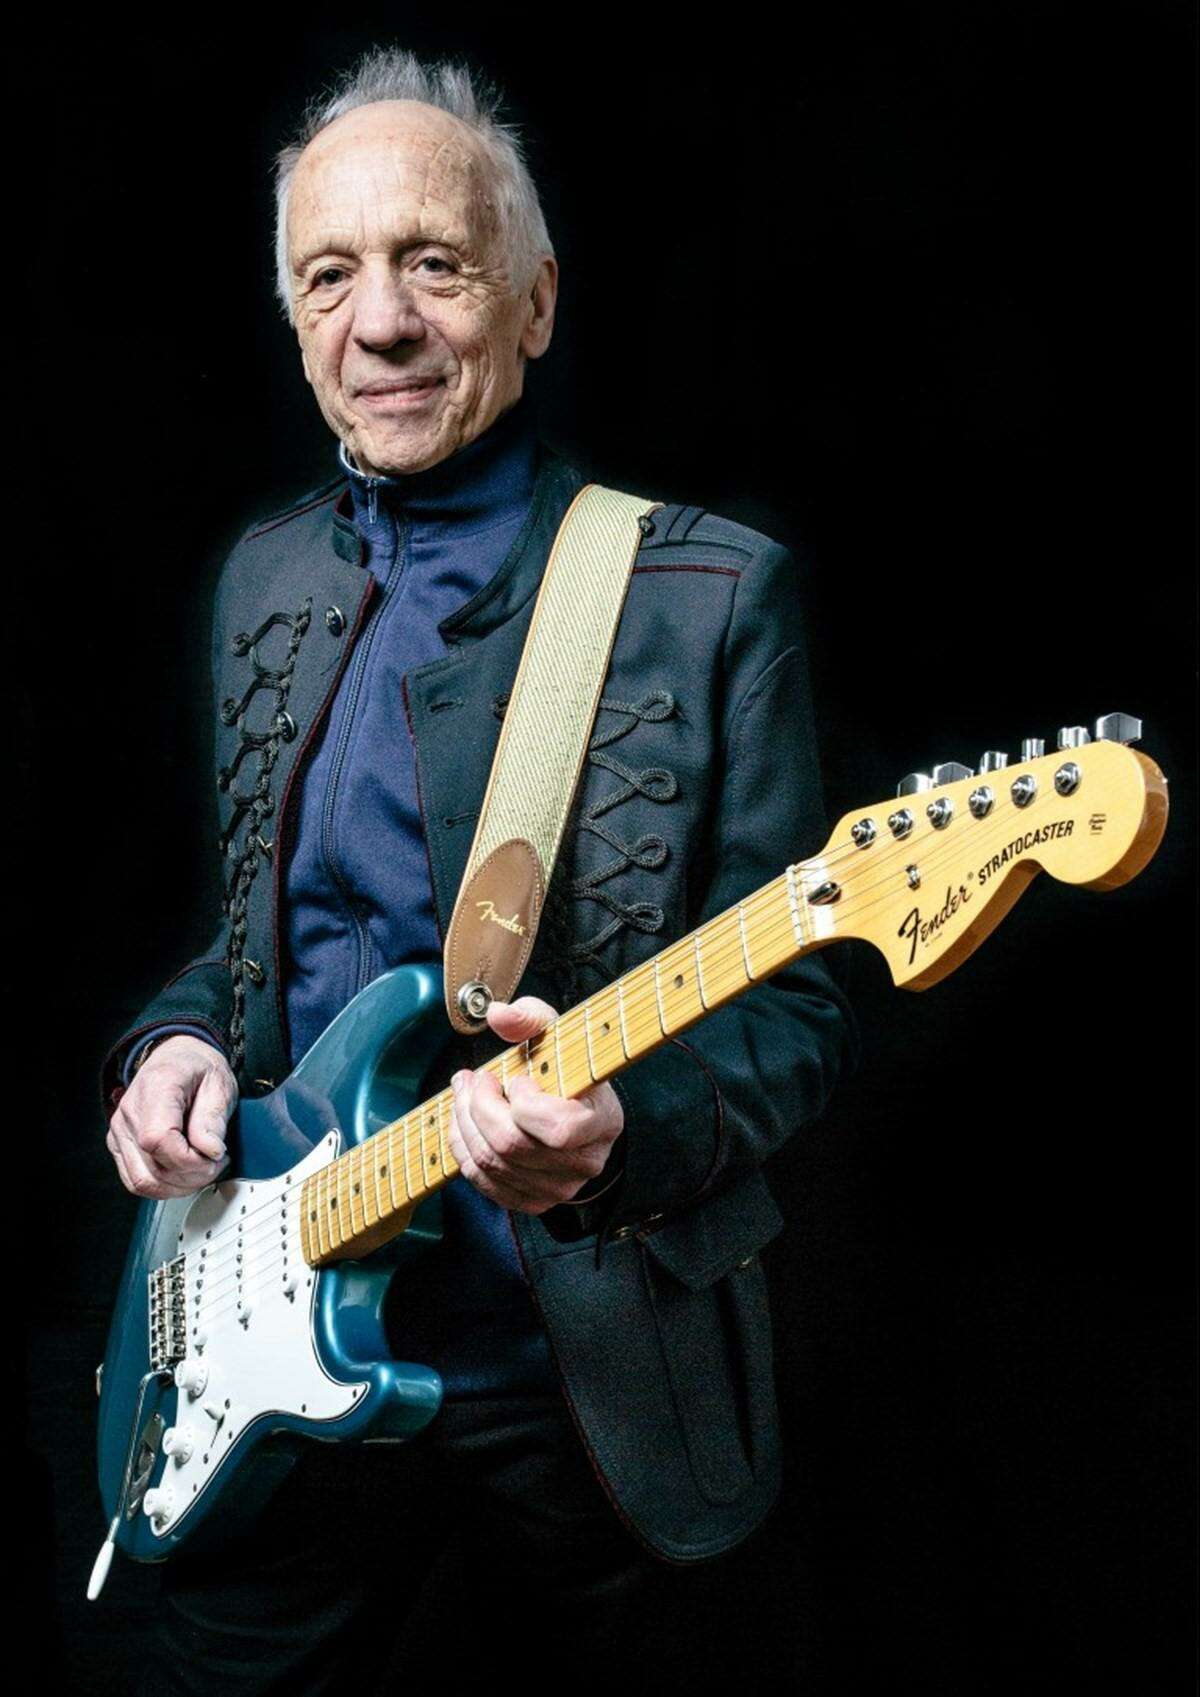 Iconic guitarist Robin Trower is set to perform at the Ridgefield Playhouse Oct. 4. Robin has proven to be one of the most influential rock musicians of all time. His mesmerizing style made him one of Britain’s hottest guitarists. Joining Procol Harum right as they were invading 1960’s radio with their moody, classical-meets-soul classic, “A Whiter Shade of Pale.” Trower made his presence felt on six of the band’s albums before breaking out as a solo artist and eventually building his own trio. To reserve your seats to see Robin Trower rock the Ridgefield Playhouse, call 203-438-5795 or go to www.ridgefieldplayhouse.org